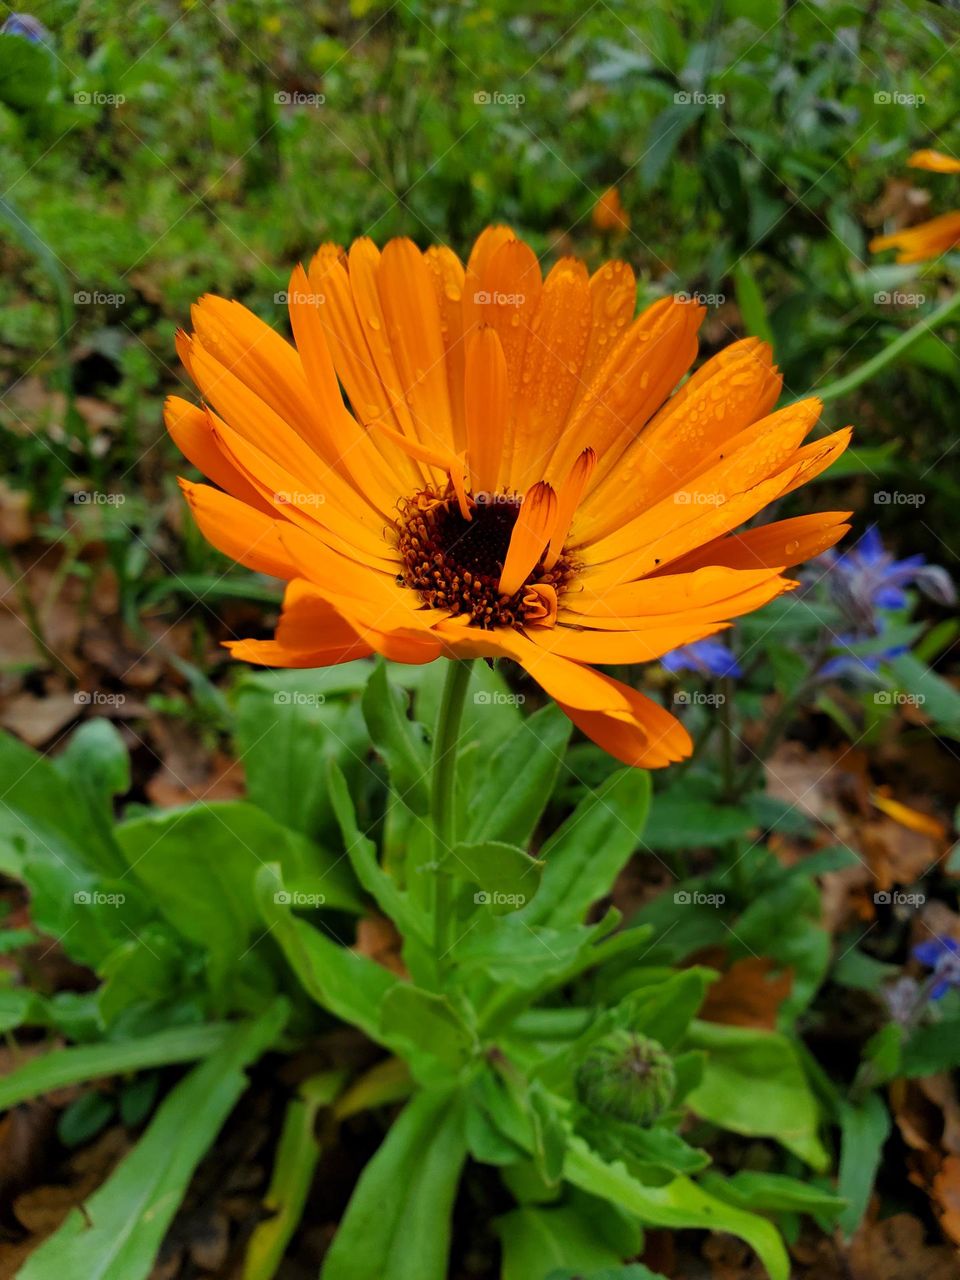 A calendula blossom in bright orange on a autumn meadow with brown leafs in the background